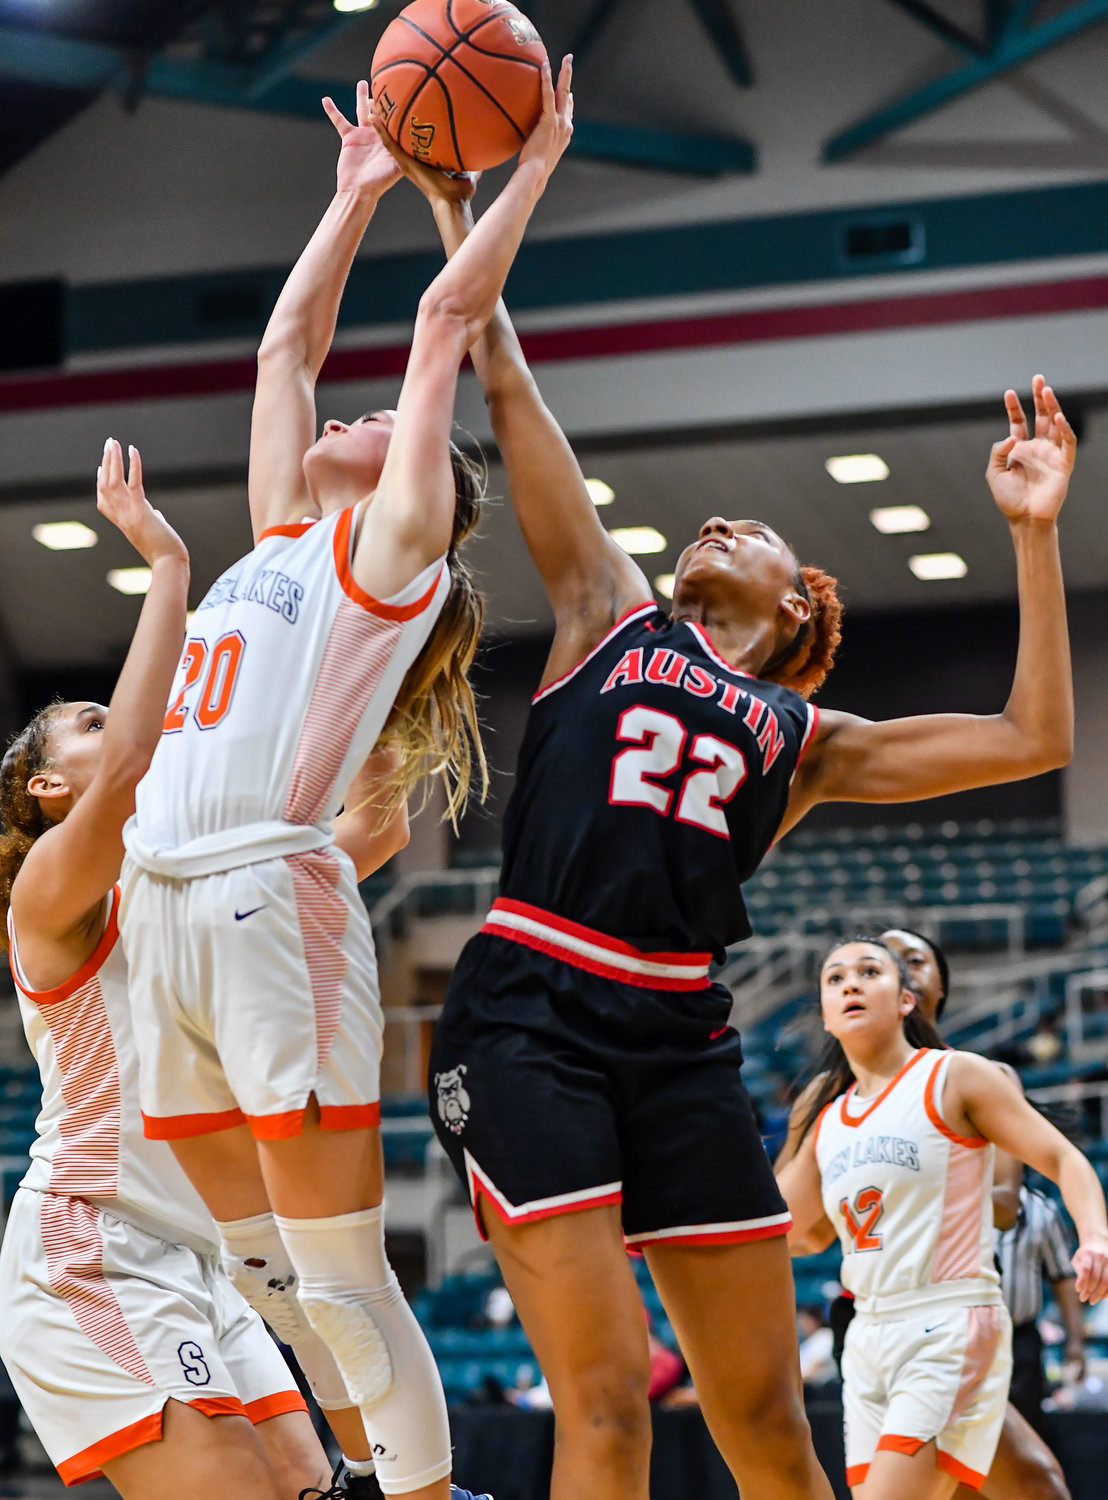 Katy Tx. Feb 22, 2022: Seven Lakes Summer Halphen #20 and Fort Bend Austins Gabrielle Johnson #22 battle for the rebound during the Regional Quarterfinal playoff game, Seven Lakes vs Fort Bend Austin at the Merrell Center. (Photo by Mark Goodman / Katy Times)